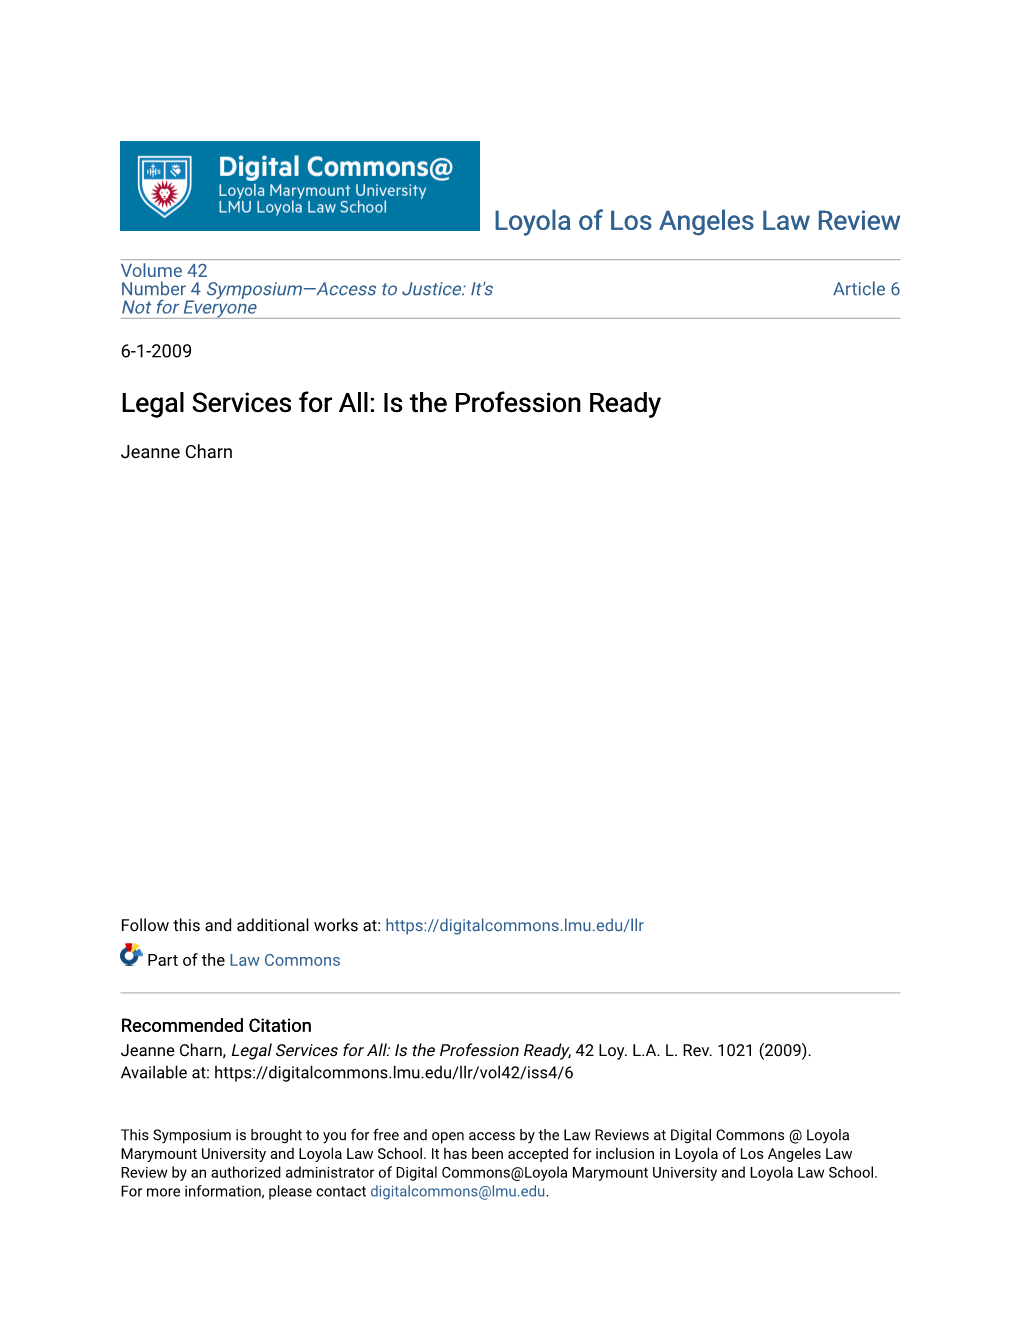 Legal Services for All: Is the Profession Ready